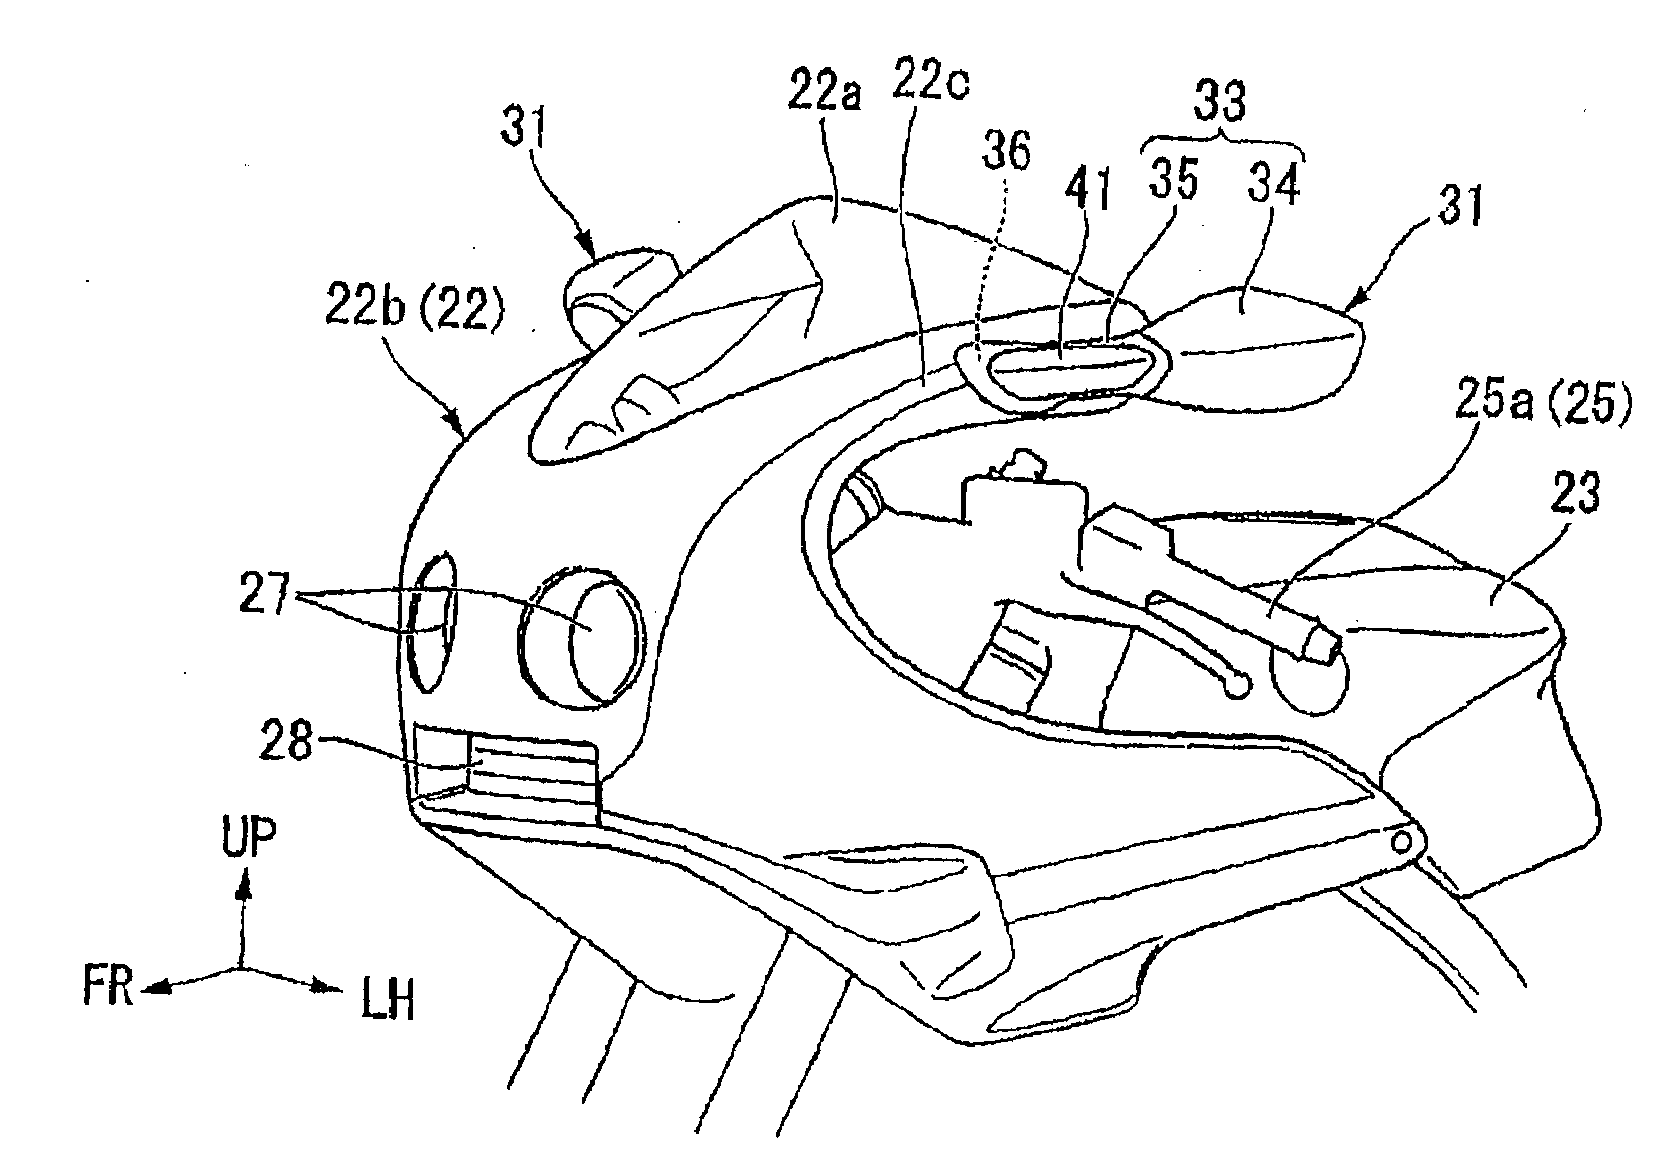 Blinker integrated rear-view mirror of saddle-ride type vehicle